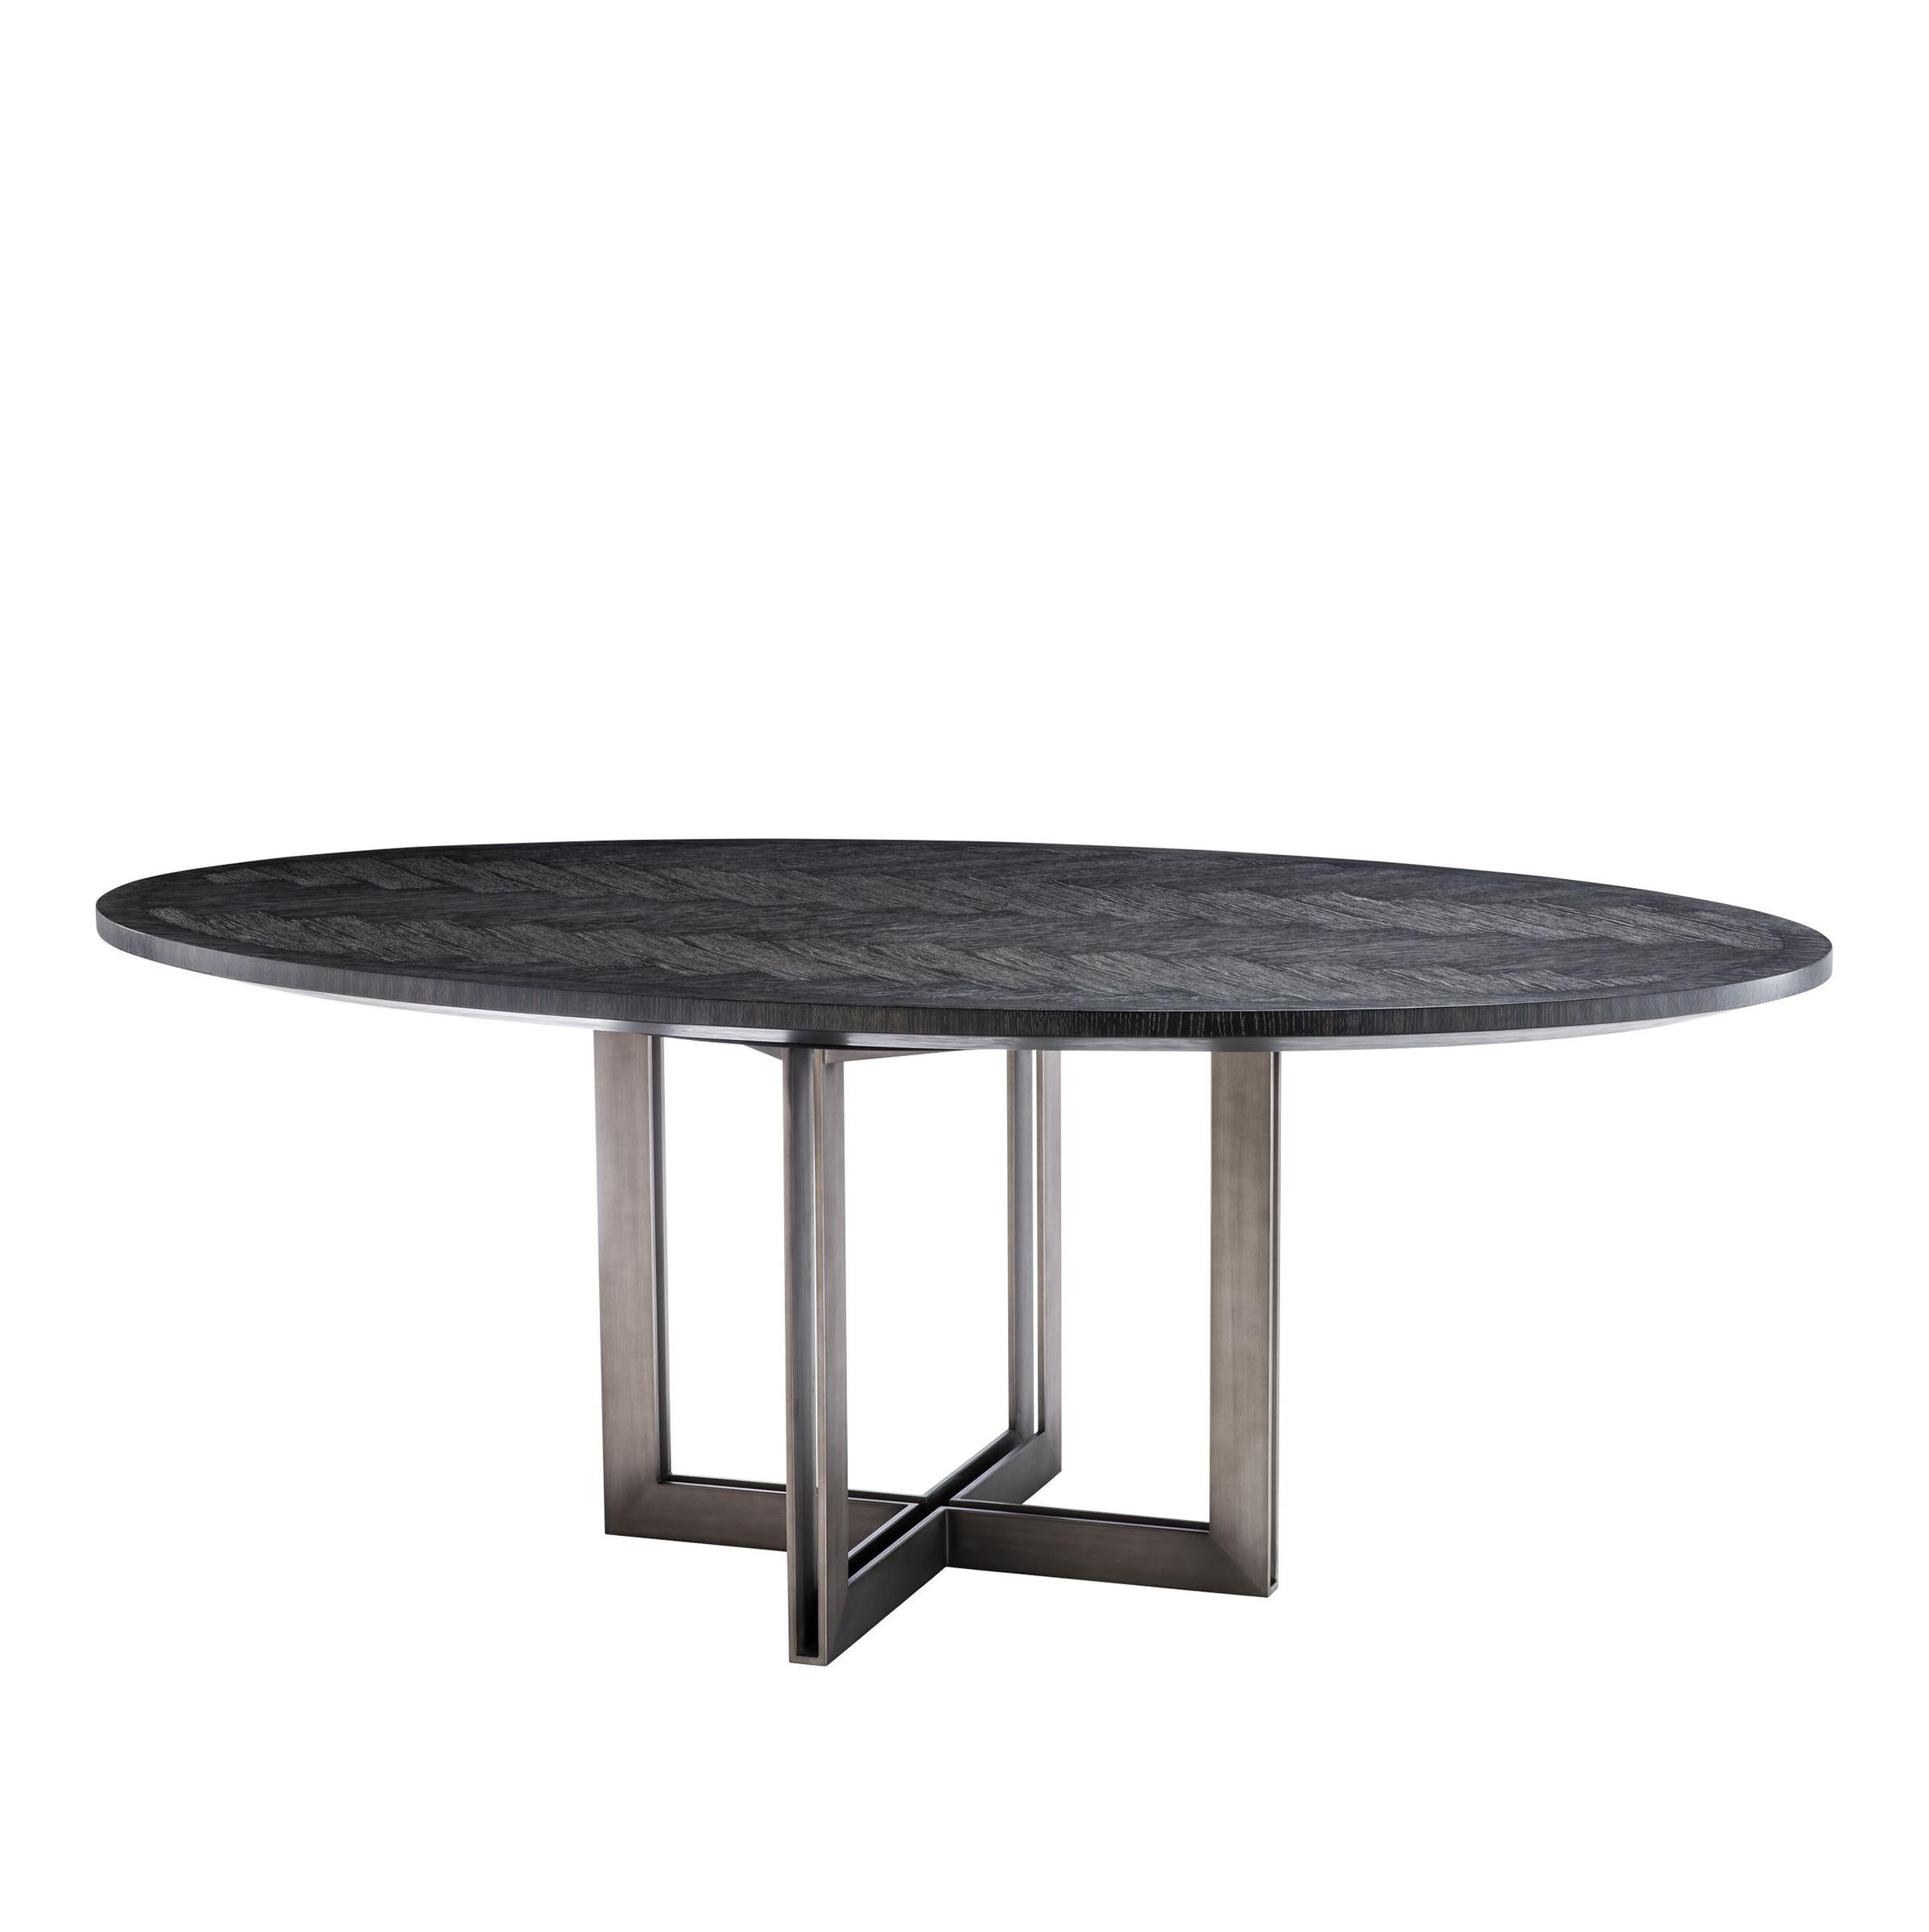 Dining table brass oval black with charcoal oak
veneer top. On bronze finish base.
Also available in brass oval dining table.